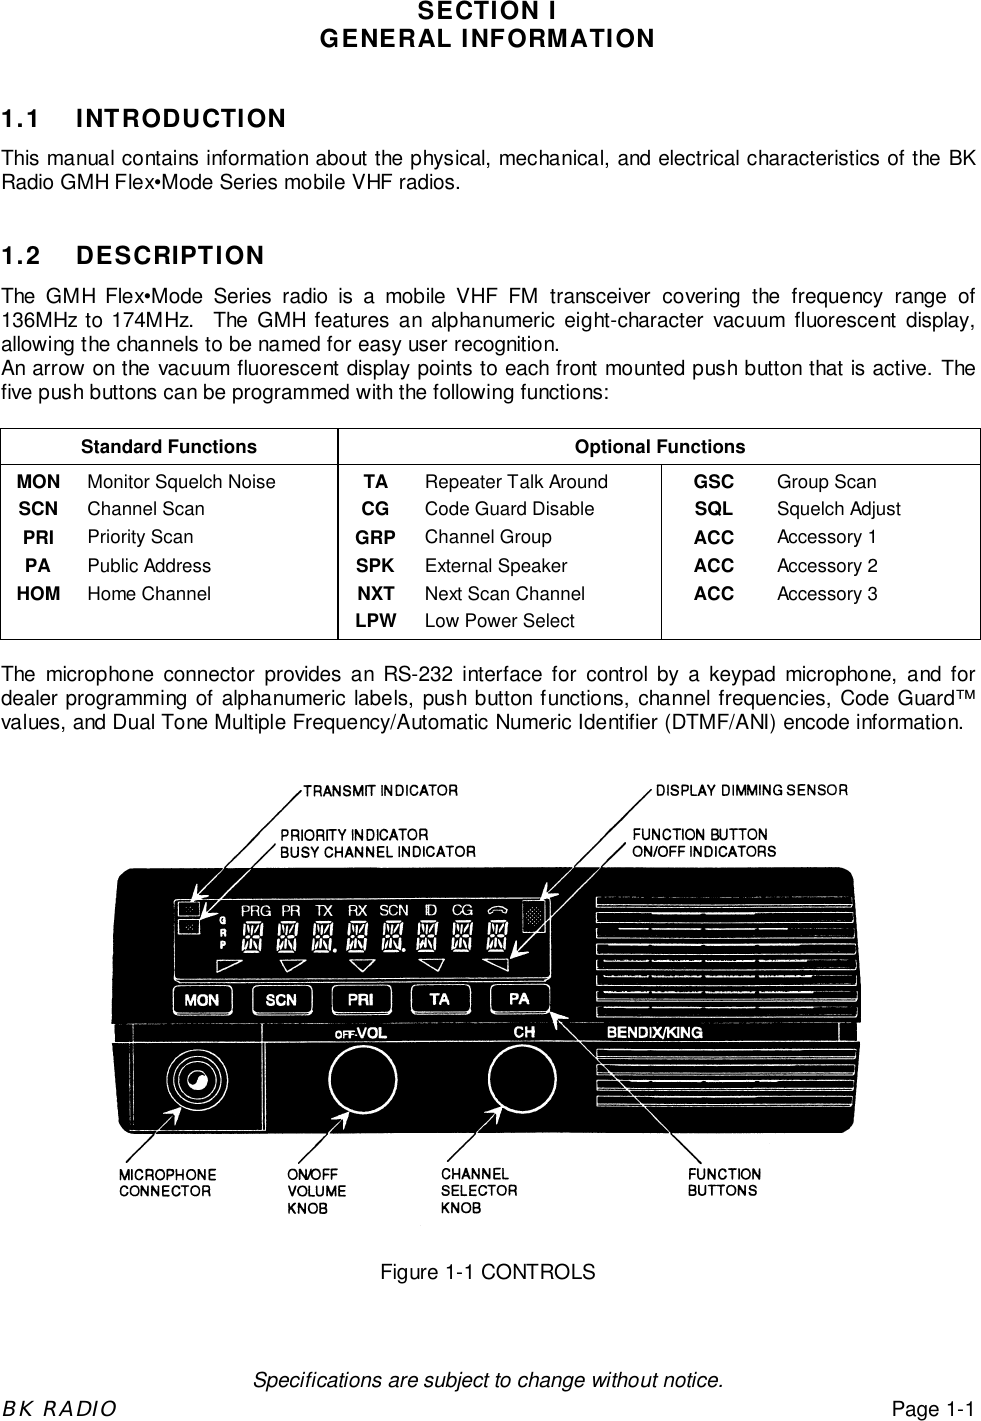 Specifications are subject to change without notice.BK RADIOPage 1-1SECTION IGENERAL INFORMATION1.1 INTRODUCTIONThis manual contains information about the physical, mechanical, and electrical characteristics of the BKRadio GMH Flex•Mode Series mobile VHF radios.1.2 DESCRIPTIONThe GMH Flex•Mode Series radio is a mobile VHF FM transceiver covering the frequency range of136MHz to 174MHz.  The GMH features an alphanumeric eight-character vacuum fluorescent display,allowing the channels to be named for easy user recognition.An arrow on the vacuum fluorescent display points to each front mounted push button that is active. Thefive push buttons can be programmed with the following functions:Standard Functions Optional FunctionsMON Monitor Squelch Noise TA Repeater Talk Around GSC Group ScanSCN Channel Scan CG Code Guard Disable SQL Squelch AdjustPRI Priority Scan GRP Channel Group ACC Accessory 1PA Public Address SPK External Speaker ACC Accessory 2HOM Home Channel NXT Next Scan Channel ACC Accessory 3LPW Low Power SelectThe microphone connector provides an RS-232 interface for control by a keypad microphone, and fordealer programming of alphanumeric labels, push button functions, channel frequencies, Code Guard™values, and Dual Tone Multiple Frequency/Automatic Numeric Identifier (DTMF/ANI) encode information.Figure 1-1 CONTROLS